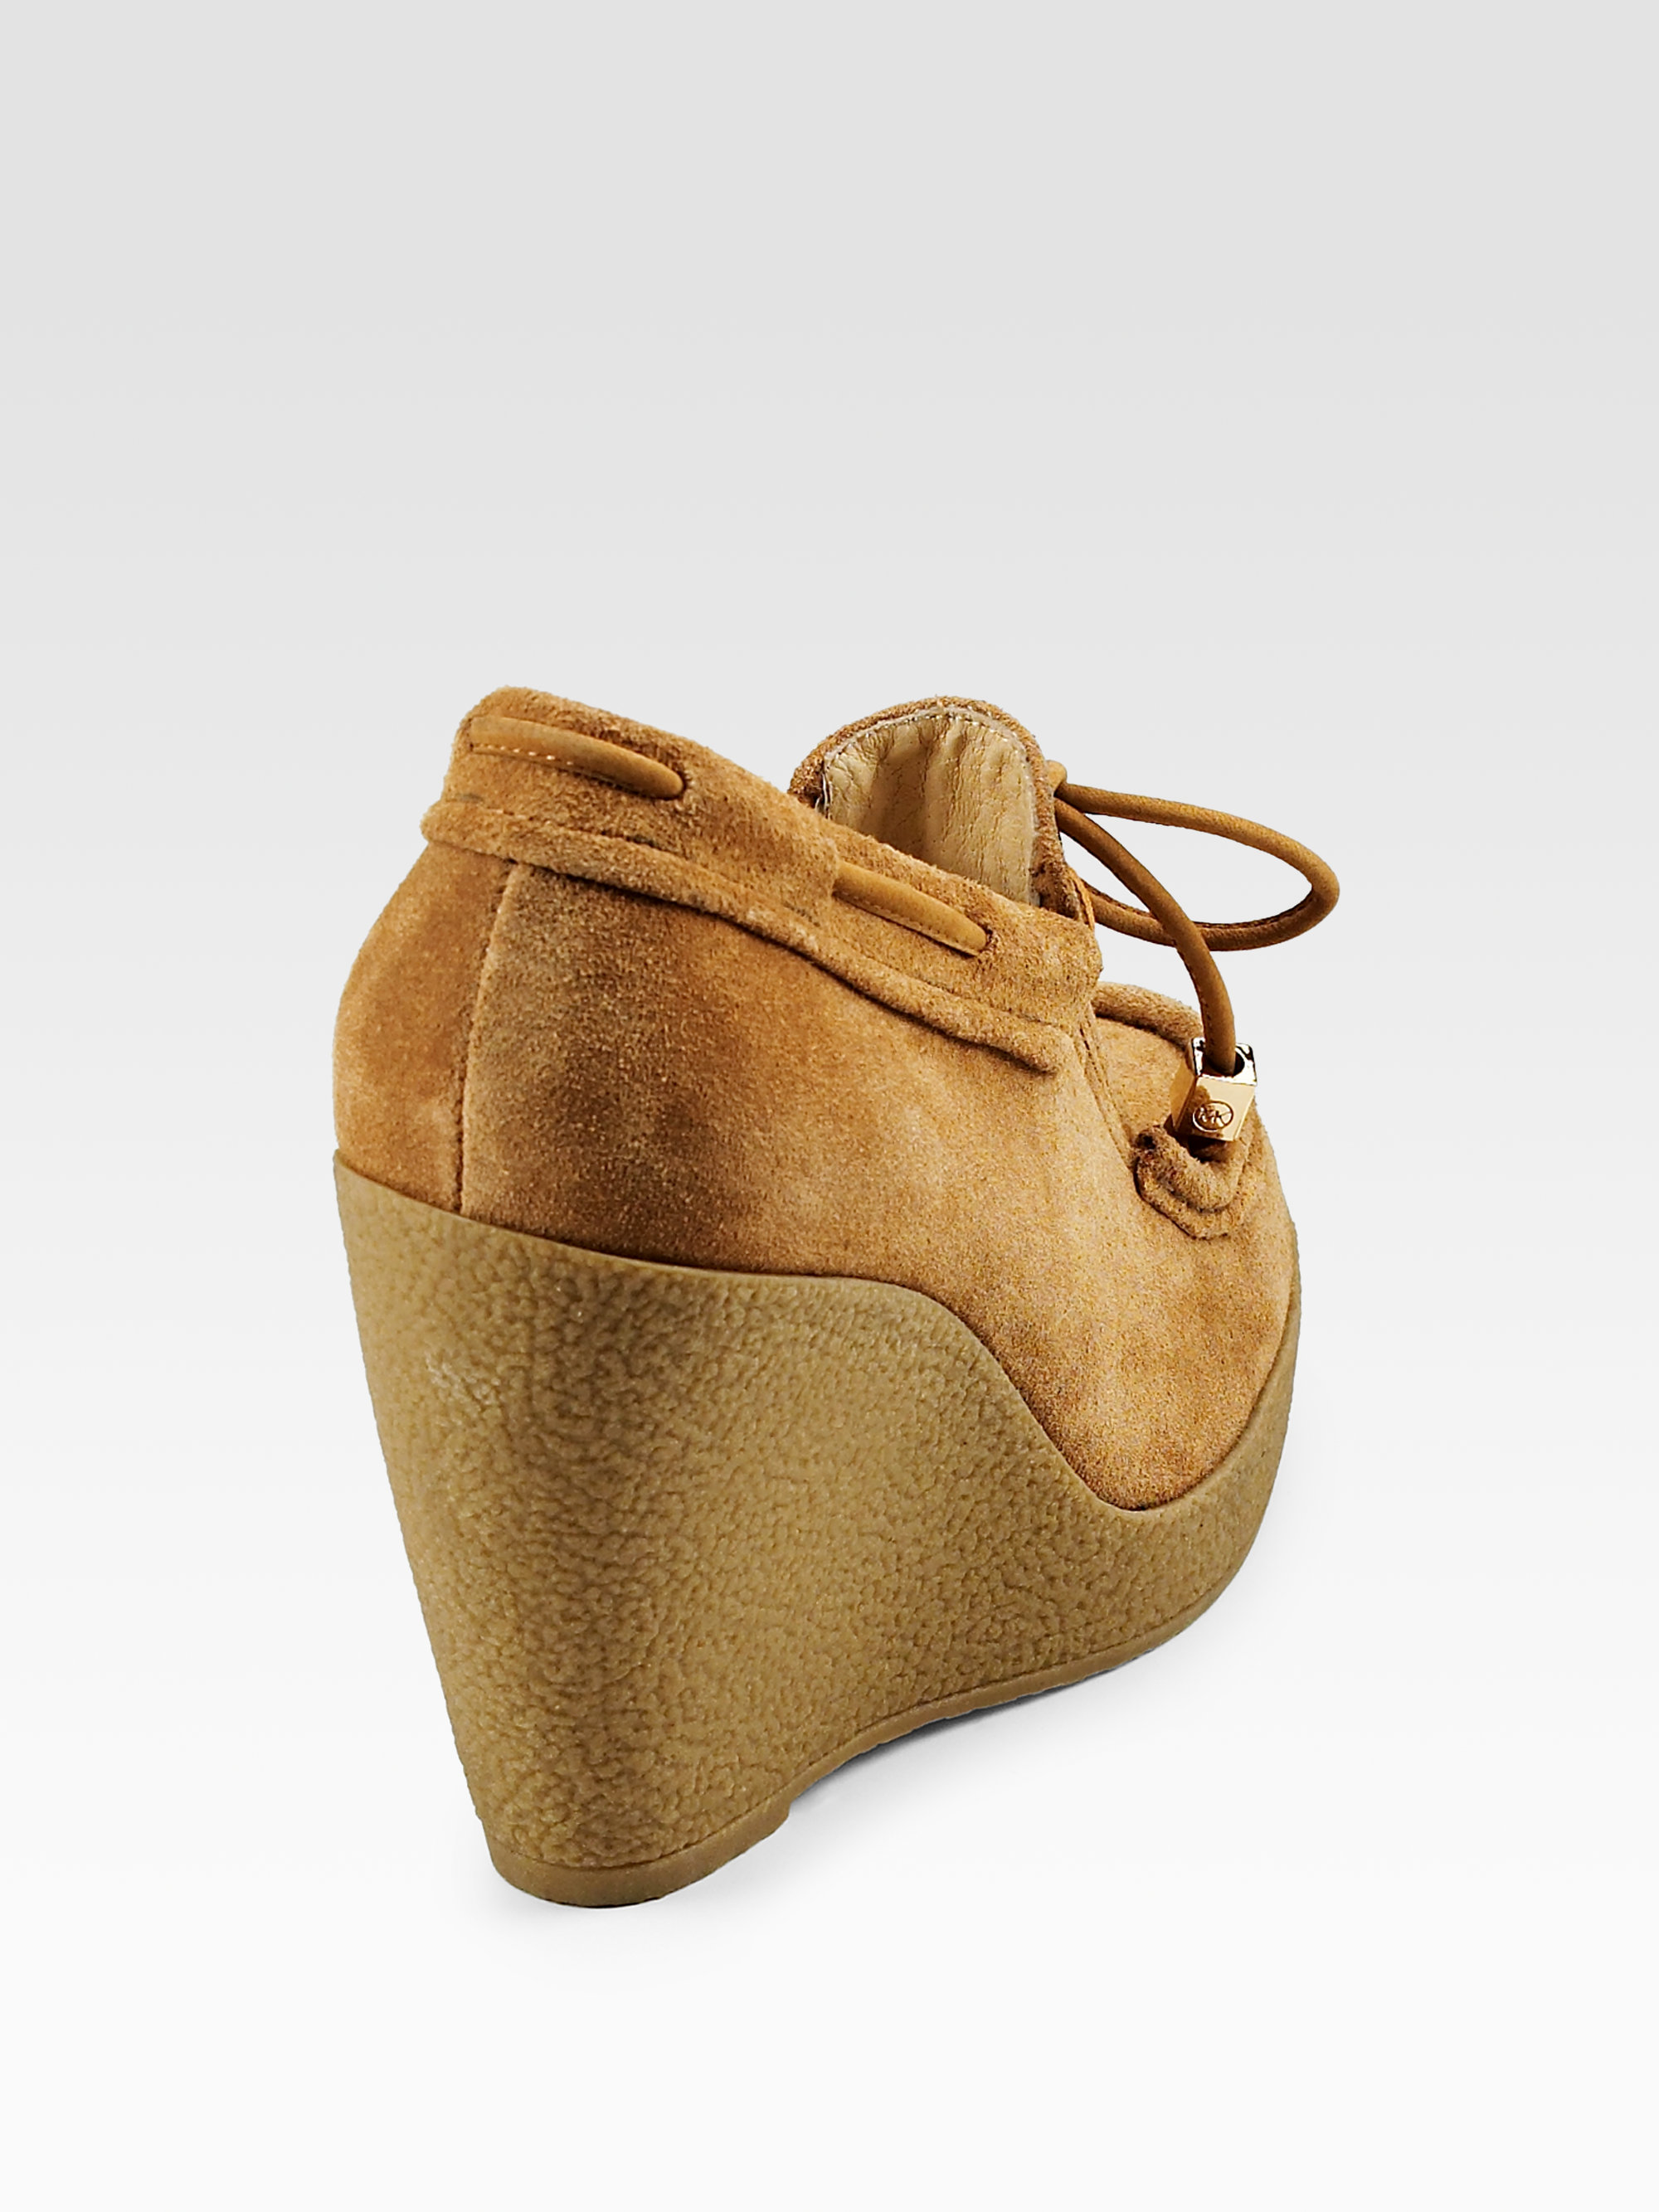 wedge moccasins